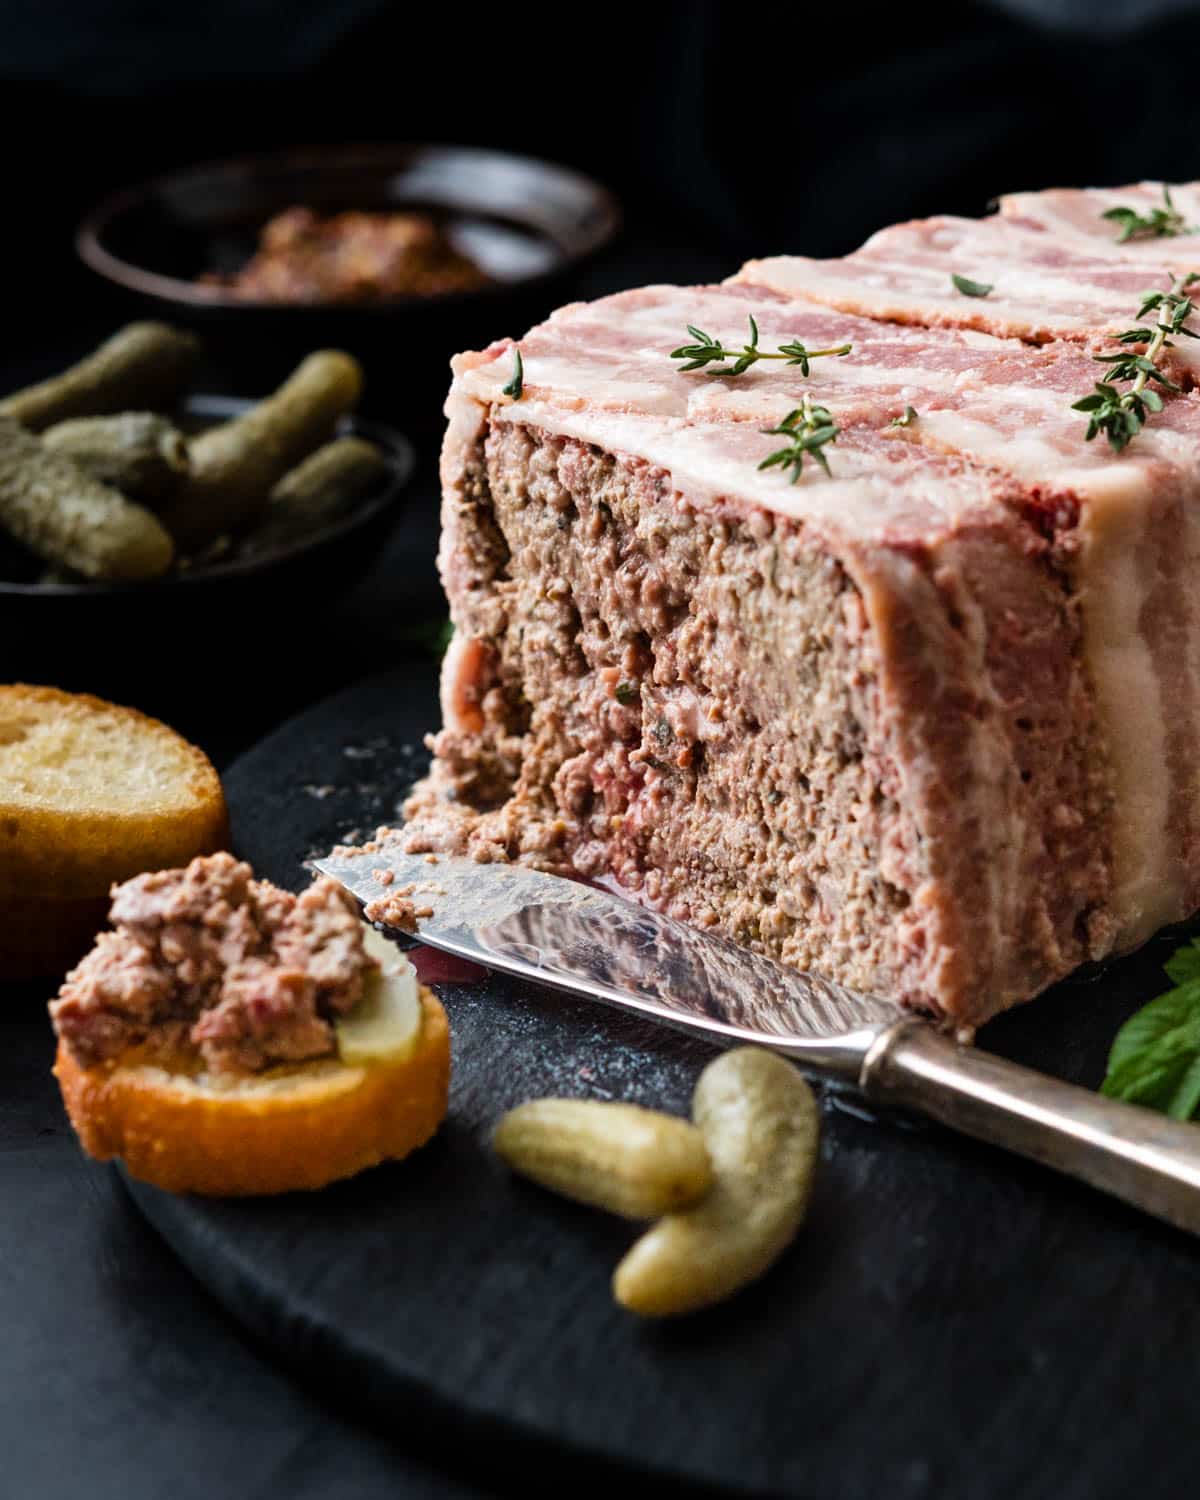 Serving the French pate on a board with cornichons.